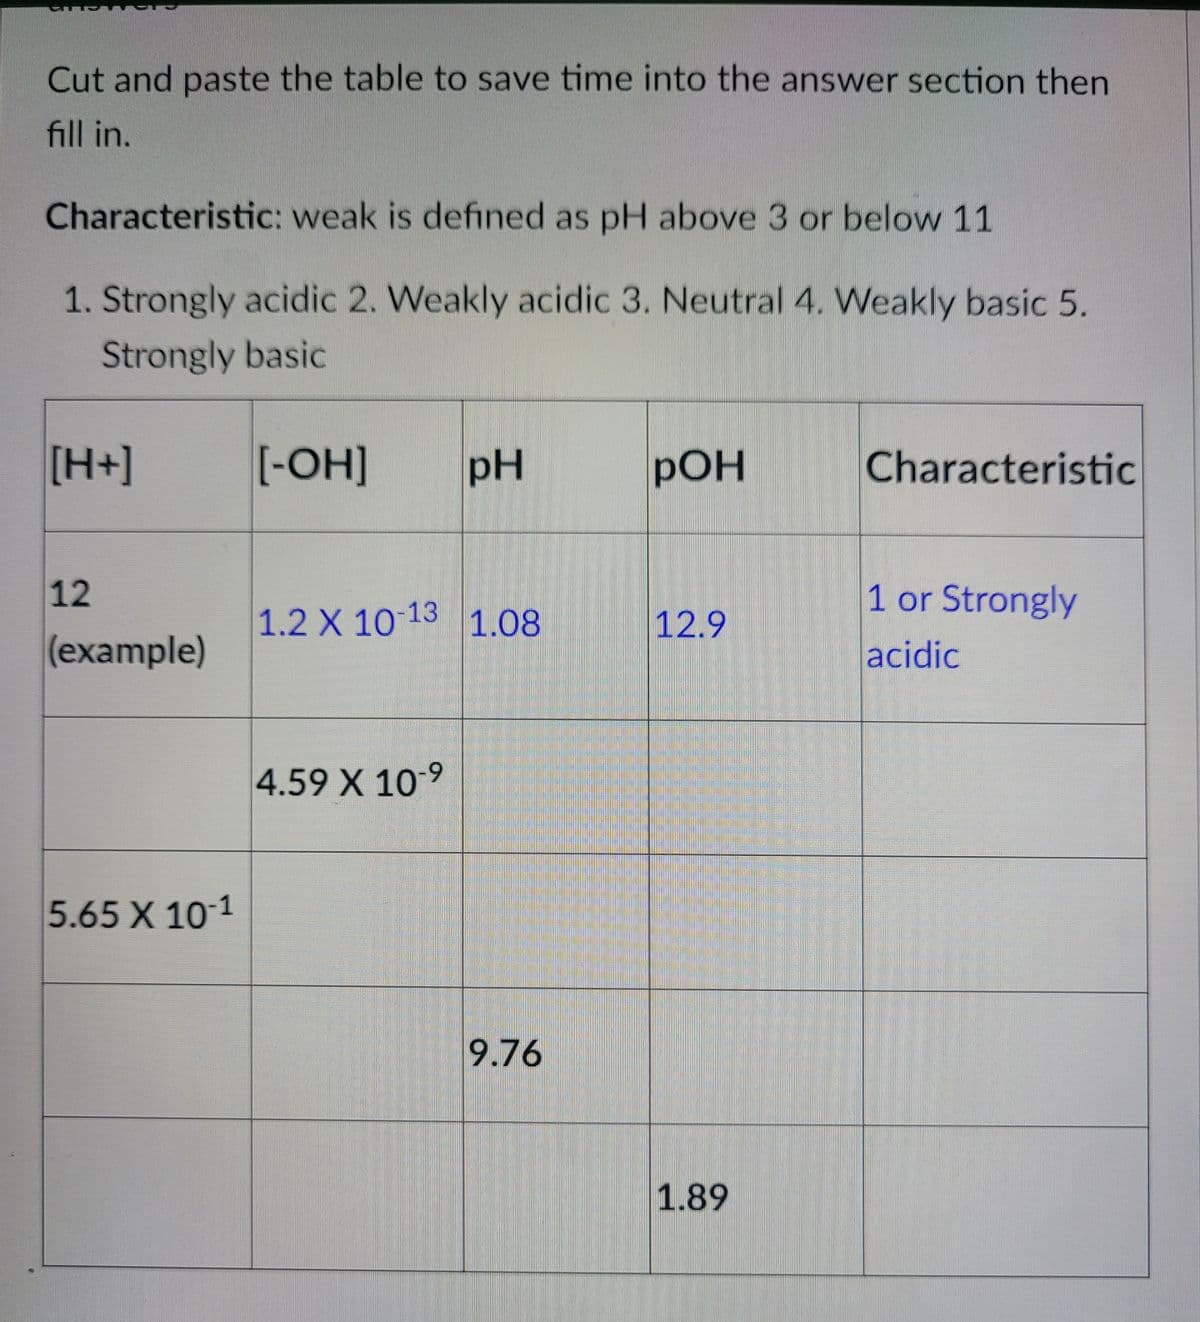 Cut and paste the table to save time into the answer section then
fill in.
Characteristic: weak is defined as pH above 3 or below 11
1. Strongly acidic 2. Weakly acidic 3. Neutral 4. Weakly basic 5.
Strongly basic
[H+]
[-OH]
pH
РОН
Characteristic
12
1 or Strongly
1.2 X 10 13 1.08
12.9
(example)
acidic
4.59 X 10-9
5.65 X 10-1
9.76
1.89
